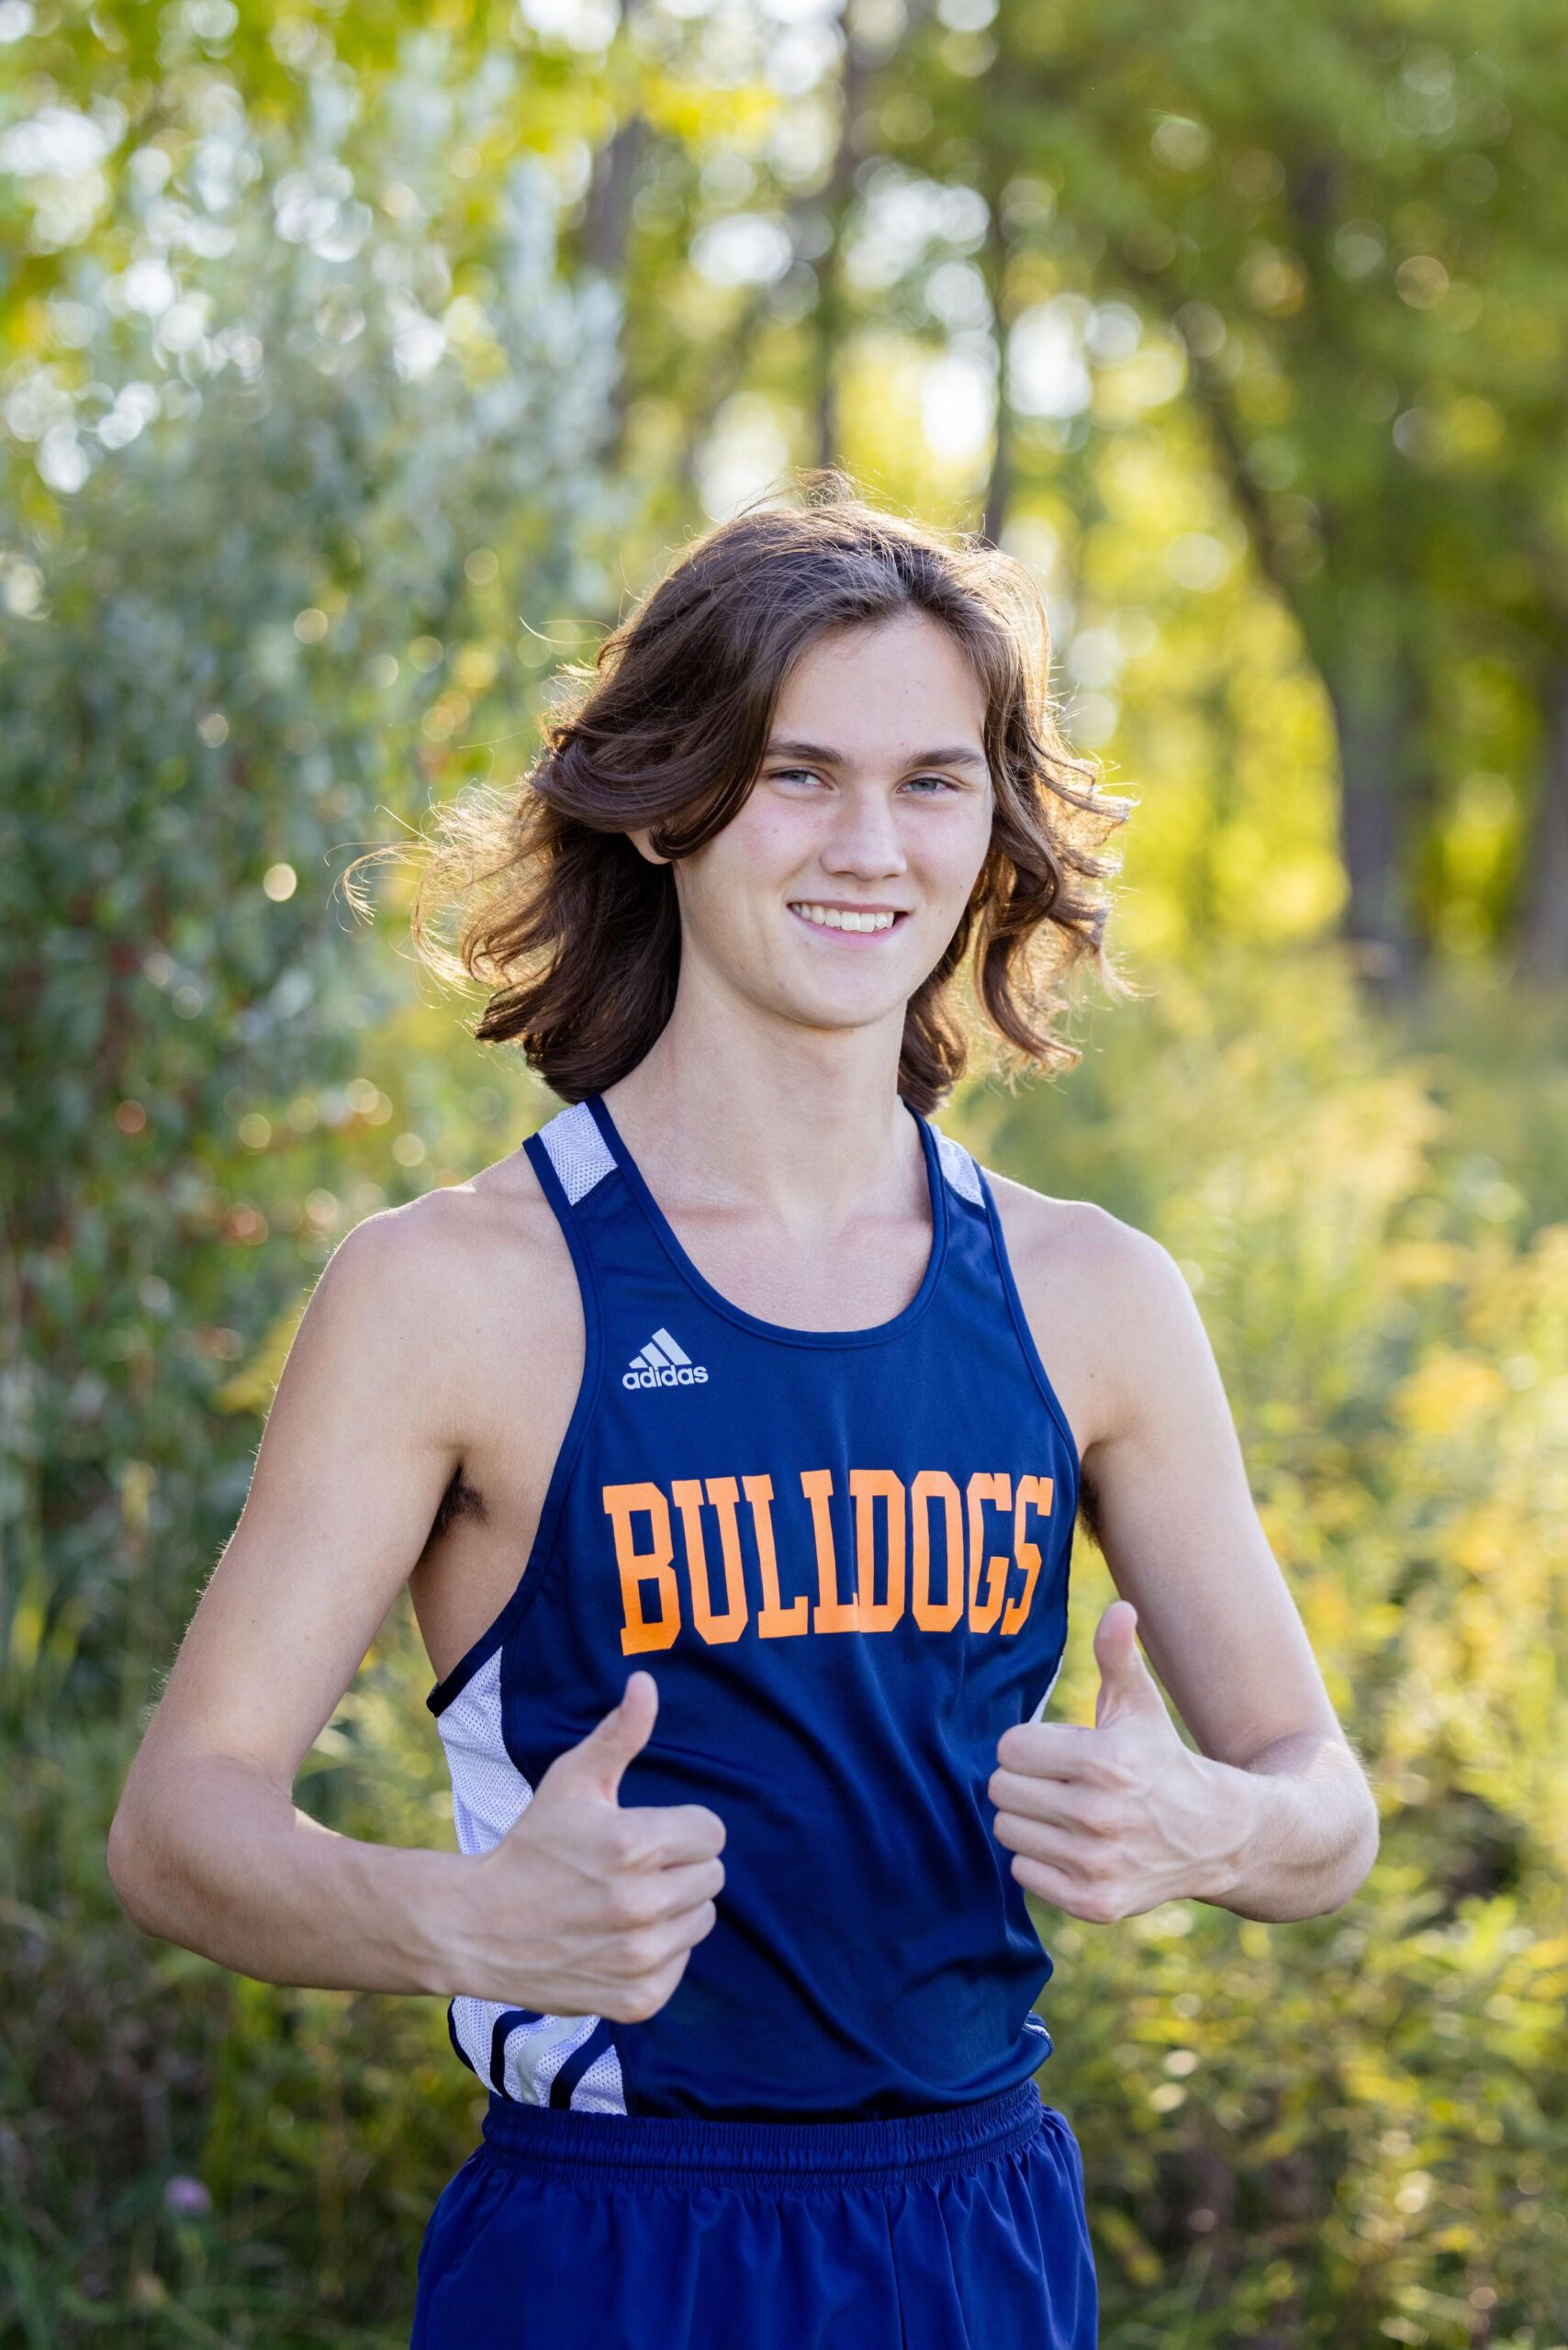 Ben Wallace to run at Carroll College - Mahomet Daily